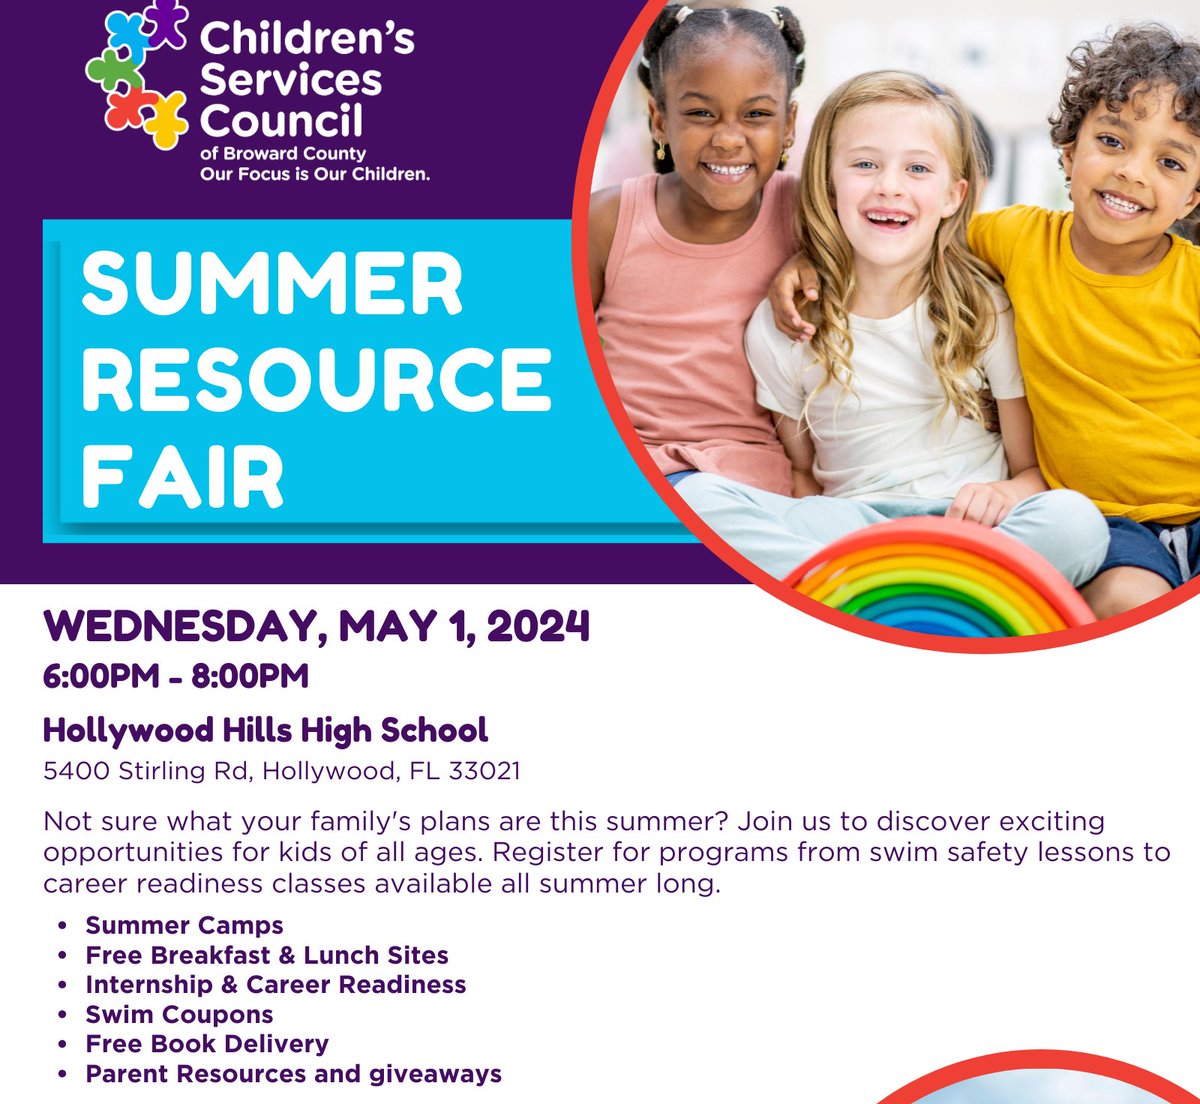 Children's Services Council (CSC) Summer Resource Fair Wednesday, May 1st from 6PM - 8PM at Hollywood Hills High School Learn about CSC programs being offered this summer. For more information, visit ow.ly/V7N750RngTP